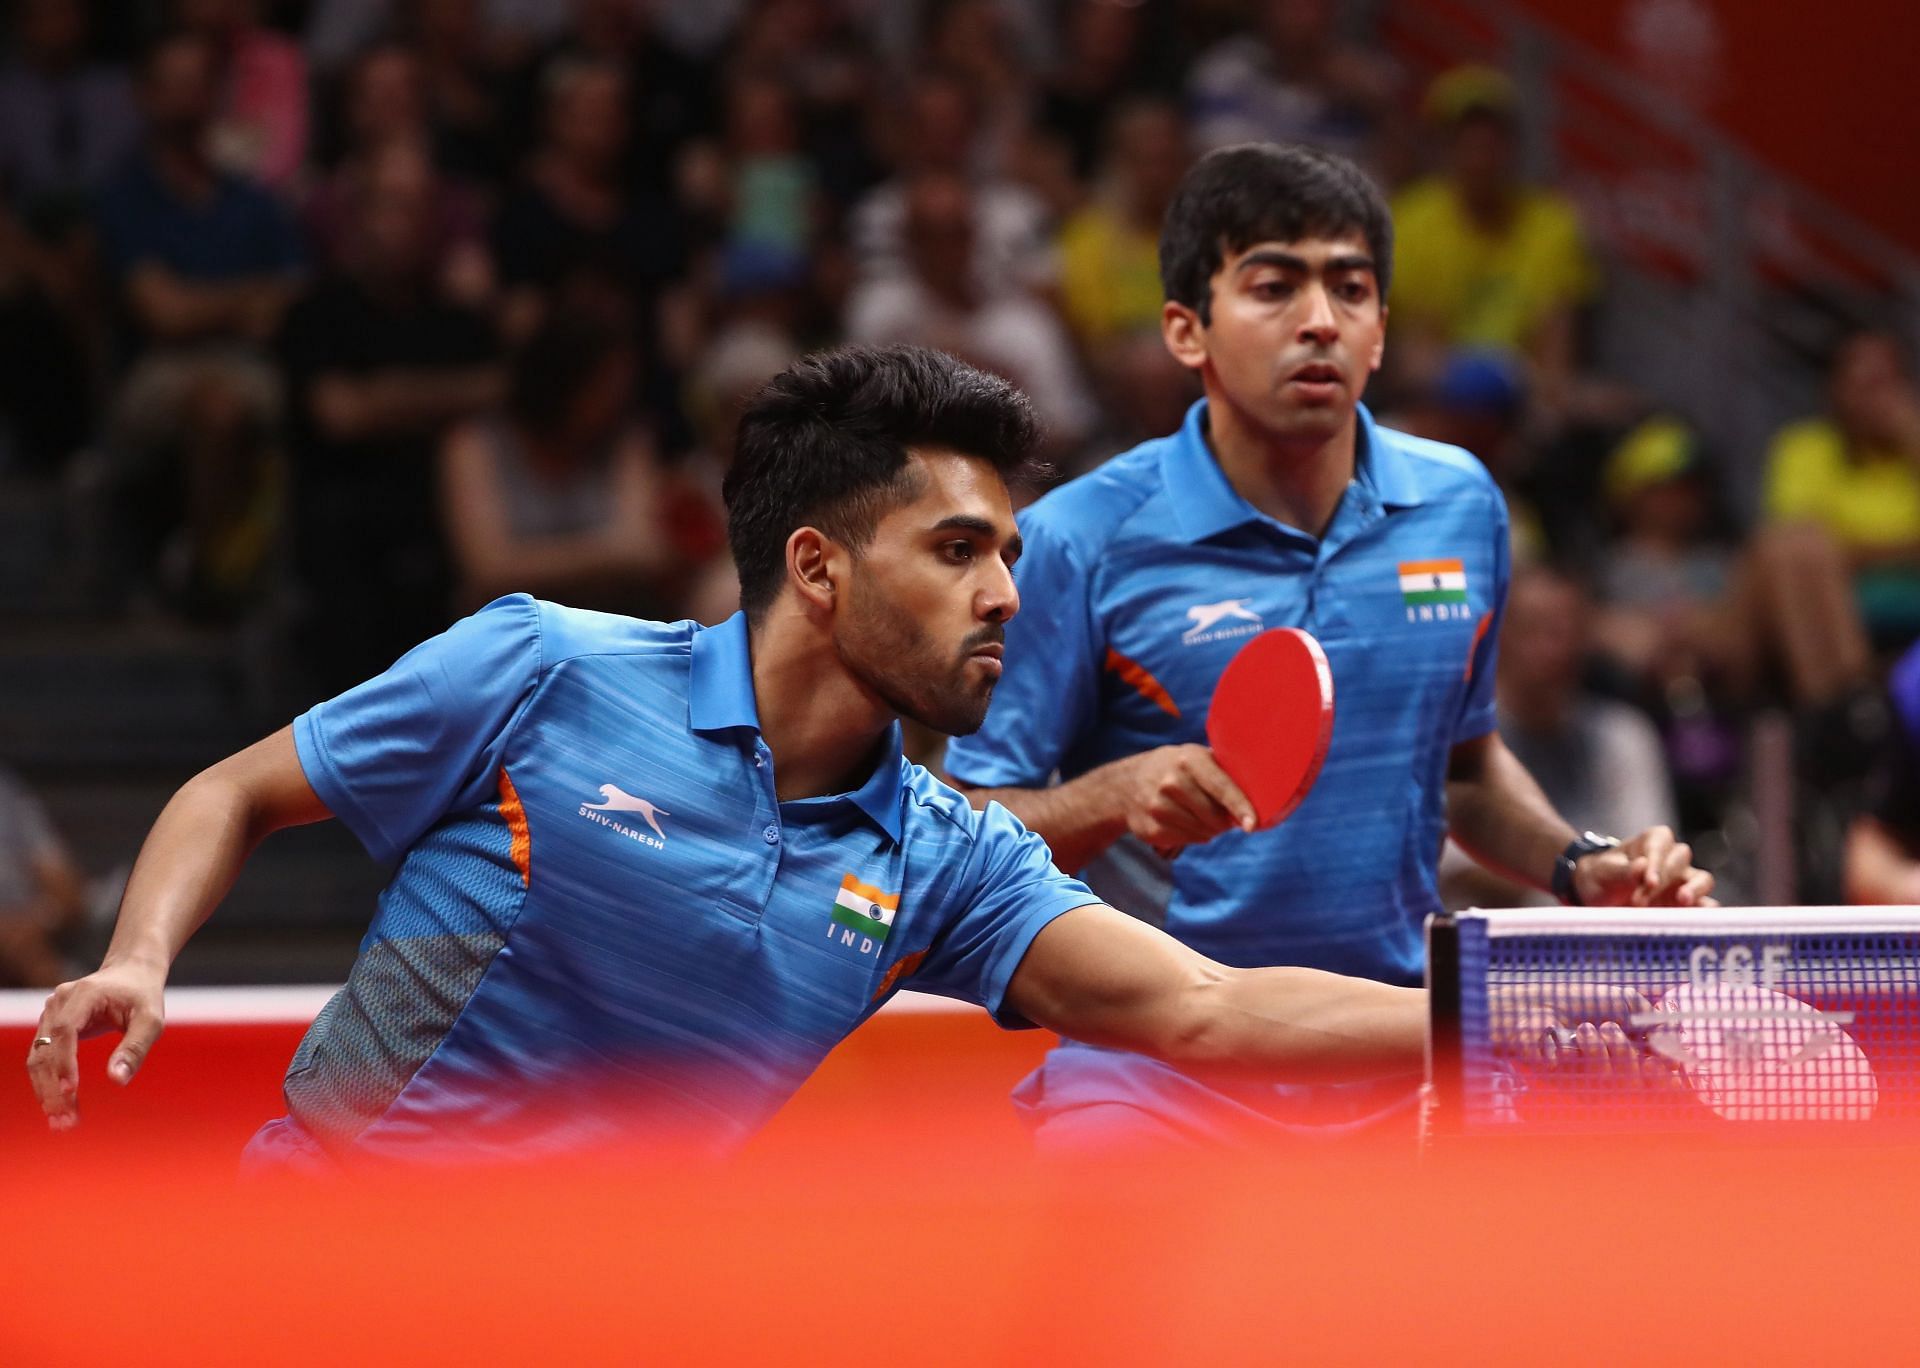 Sanil Shetty (left) will be in action at the National Ranking Table Tennis Championships. (PC: Getty Images)